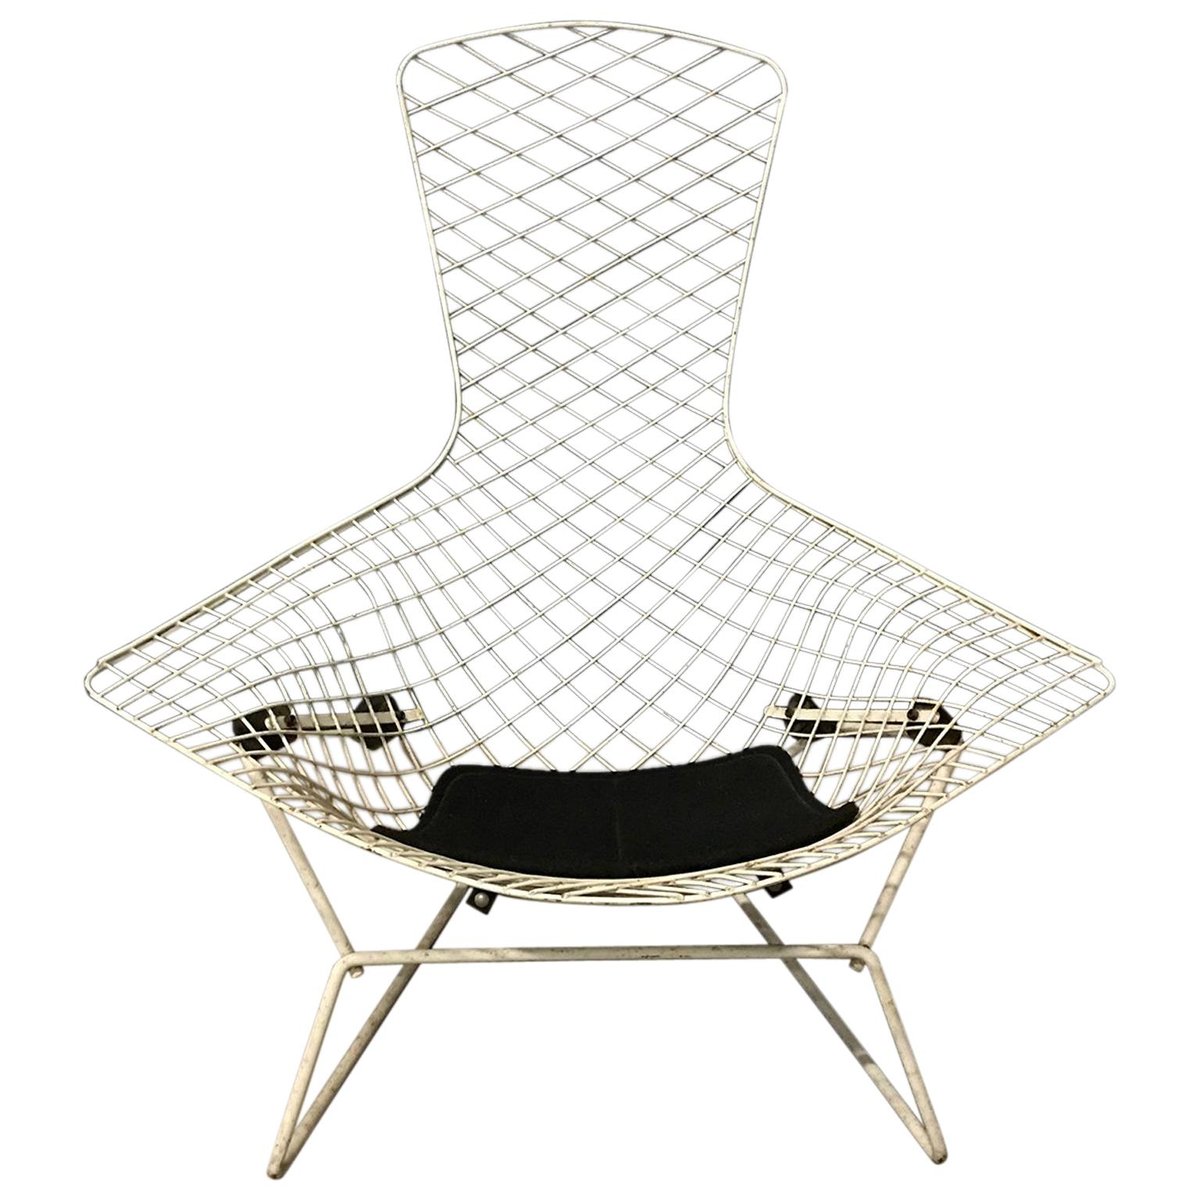 white bird chair with black pillow by harry bertoia for knoll international 1952 BO-417248